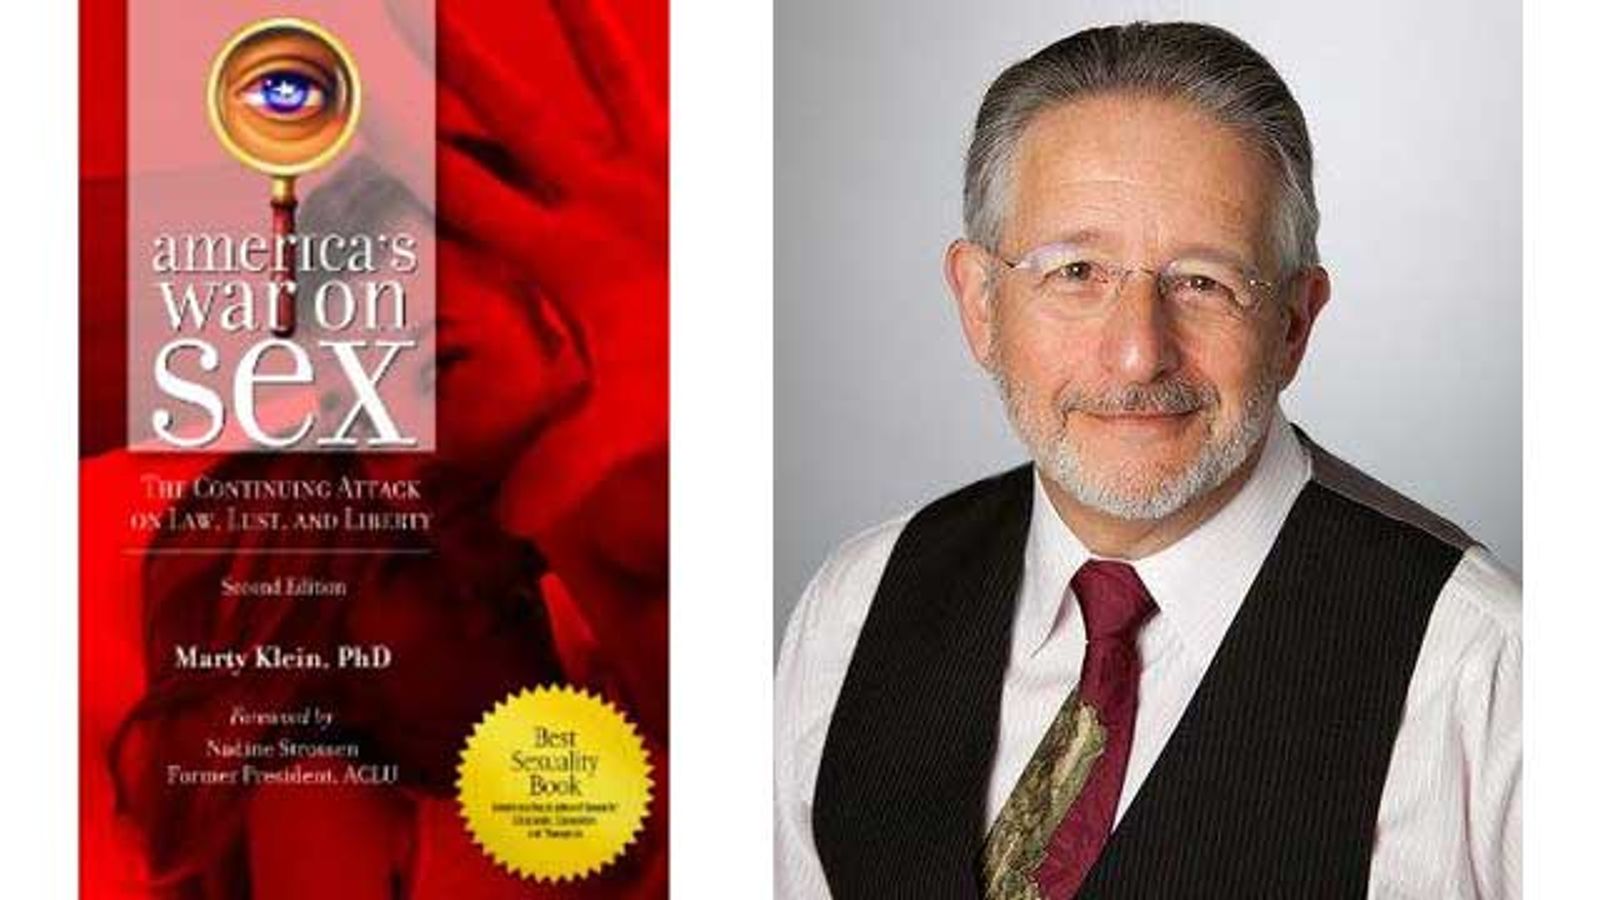 Dr. Marty Klein to Give Talk at AVN Adult Entertainment Expo